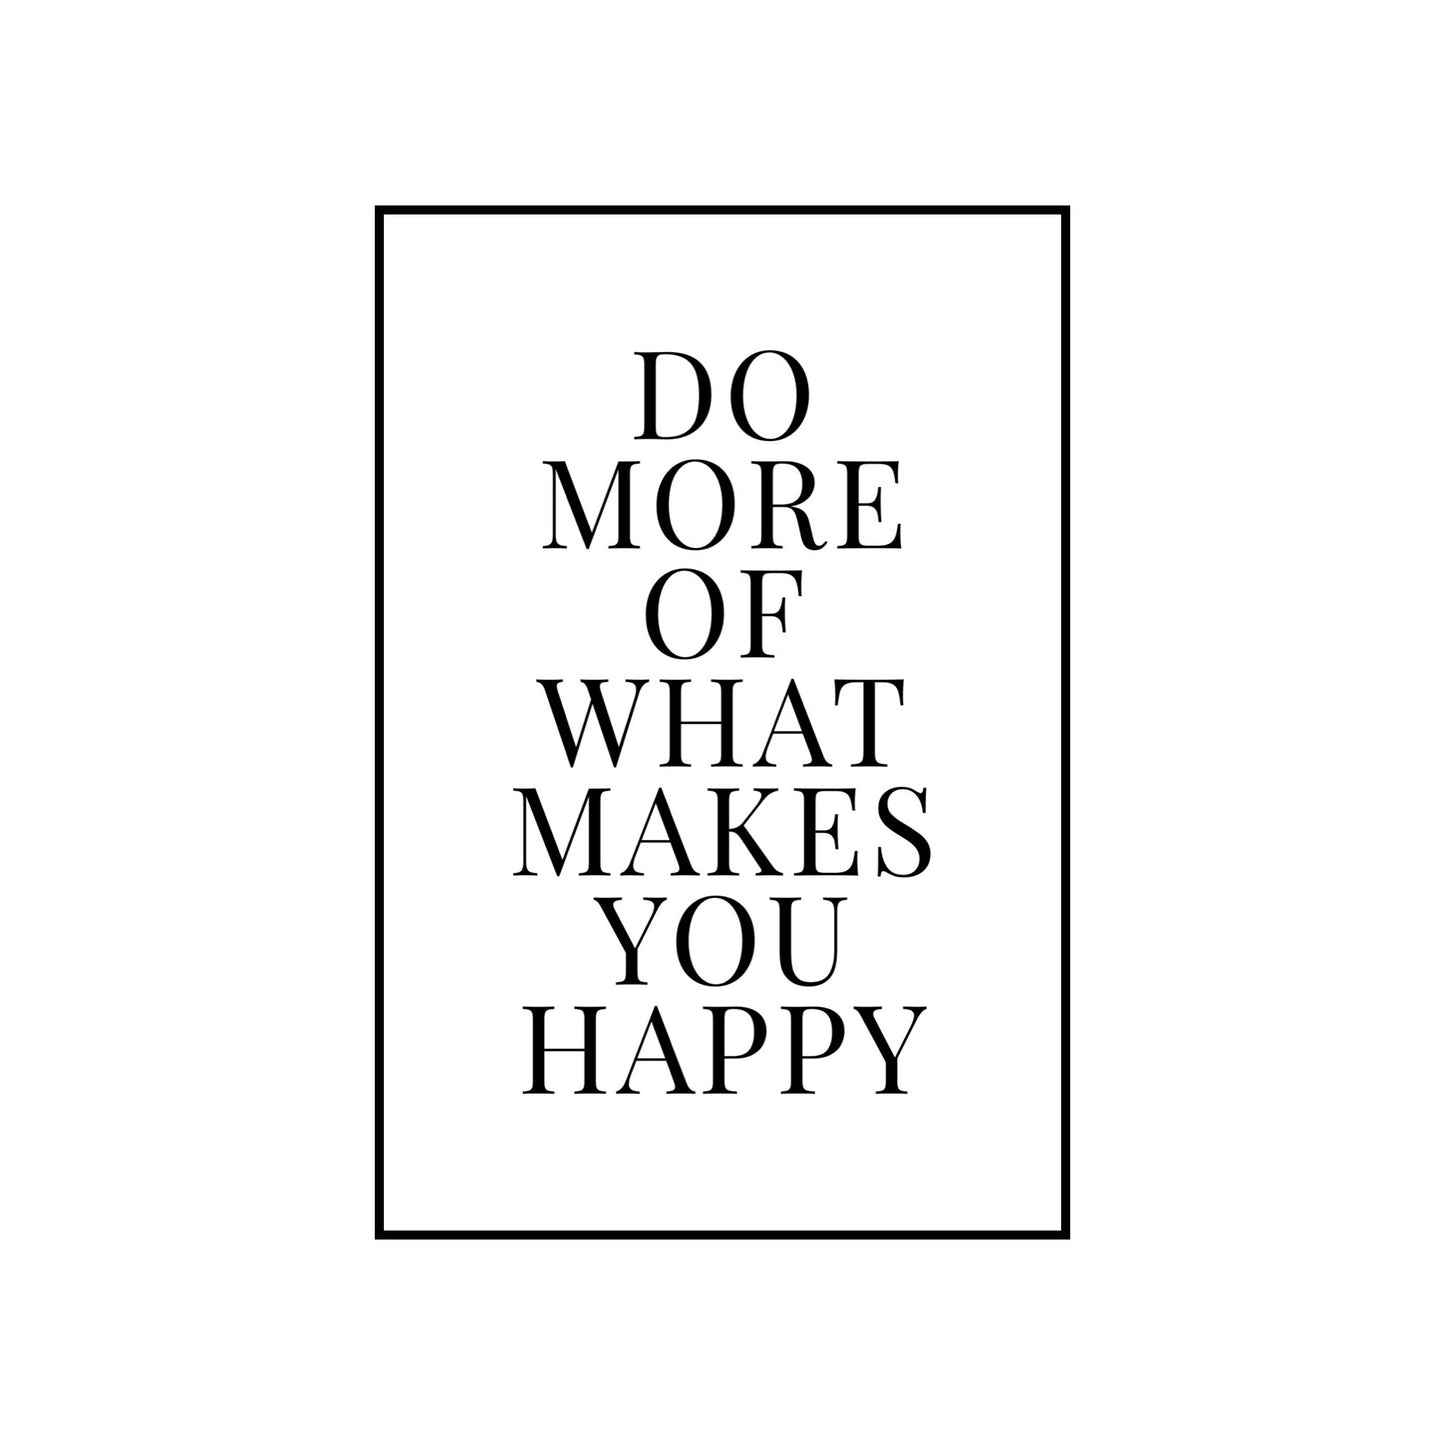 Do more of what makes you happy - THE WALL STYLIST